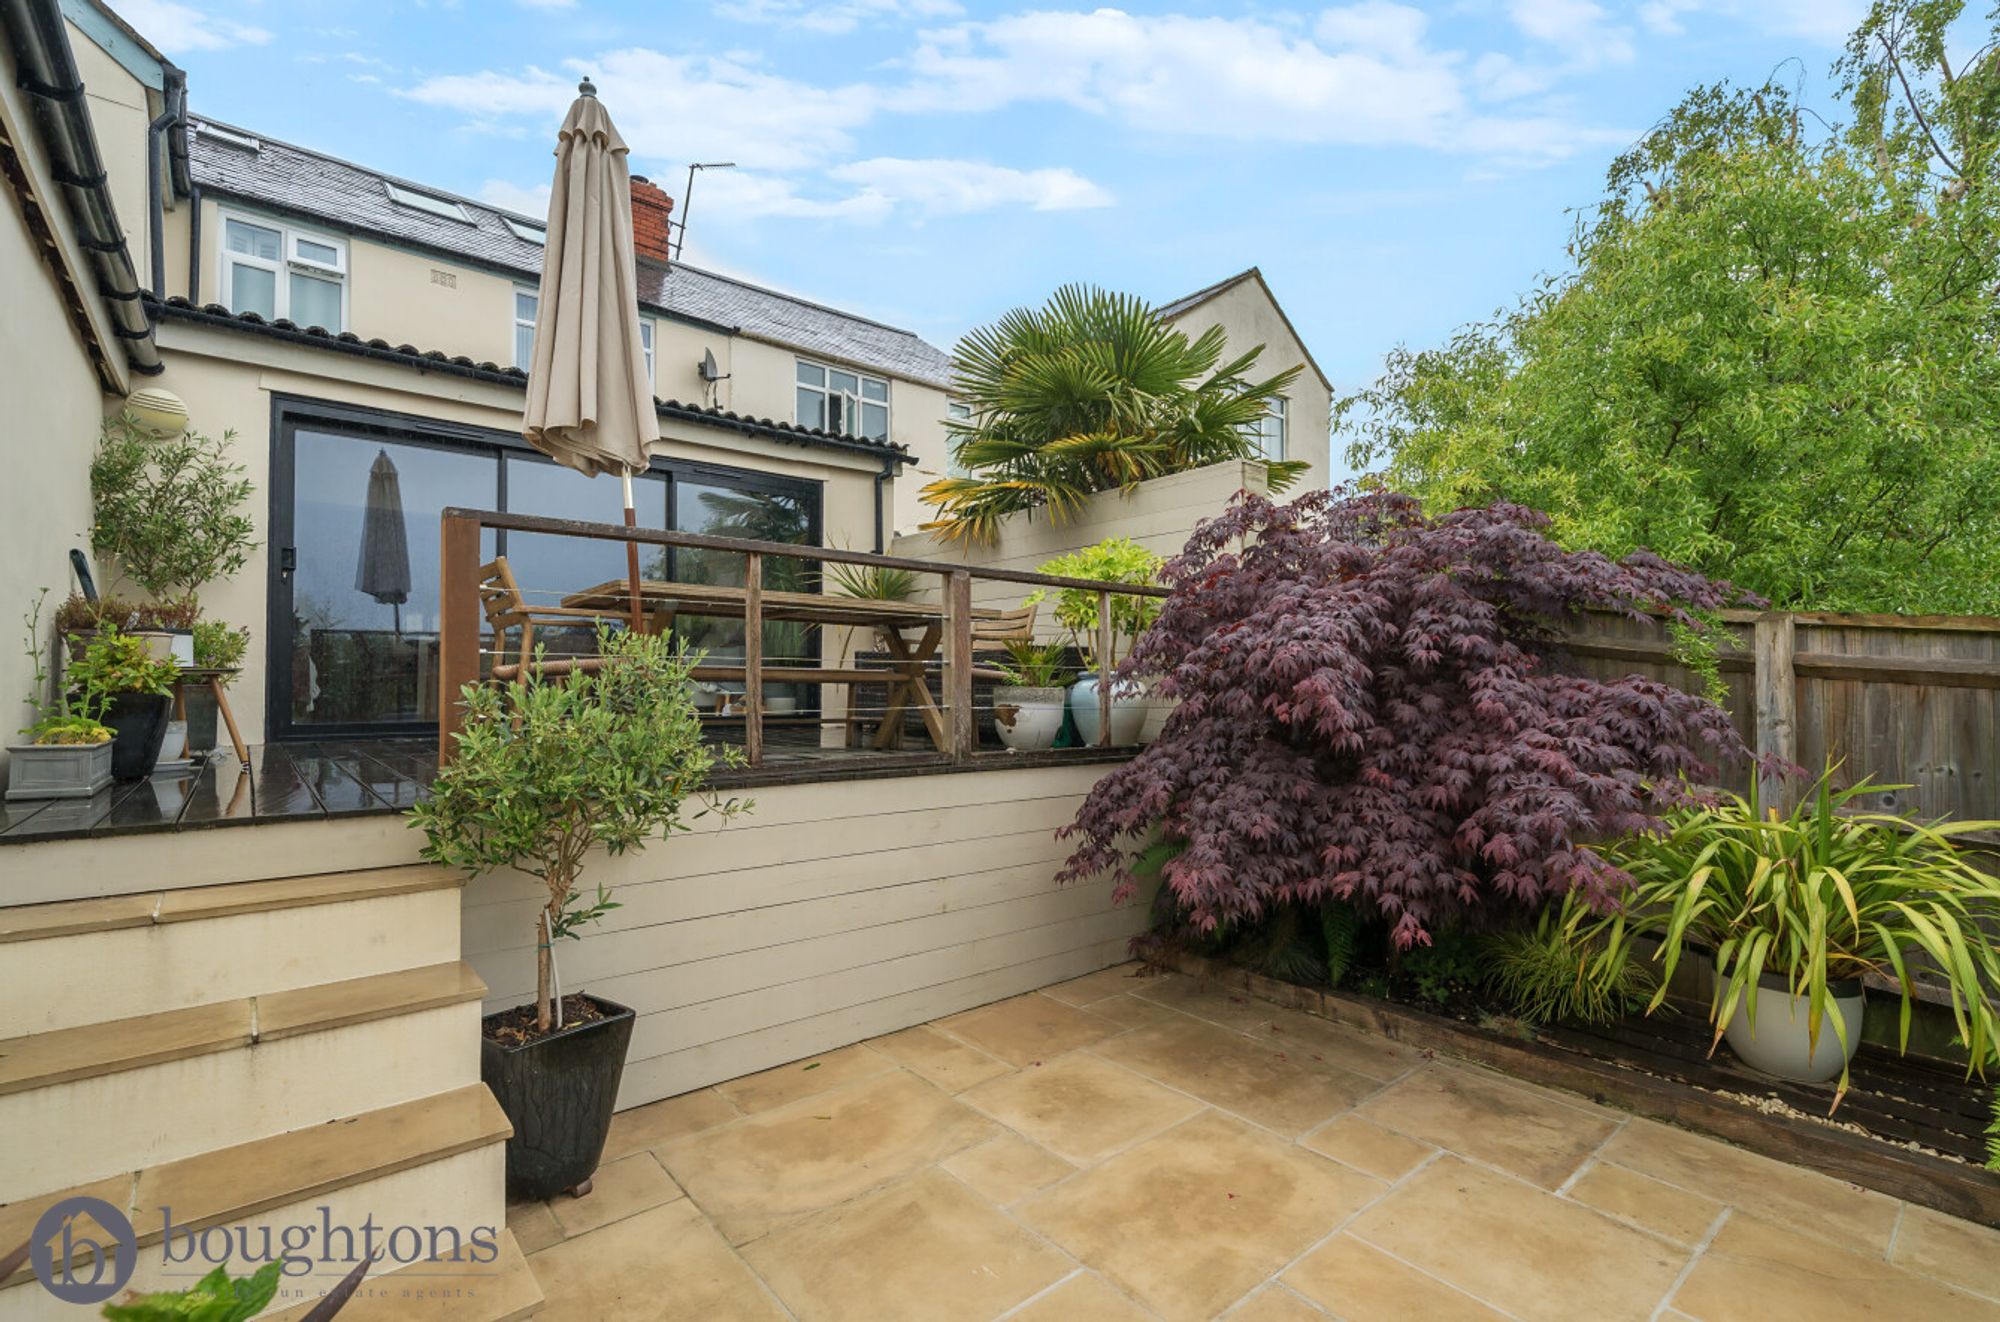 3 bed semi-detached house for sale in Banbury Road, Brackley - Property Image 1